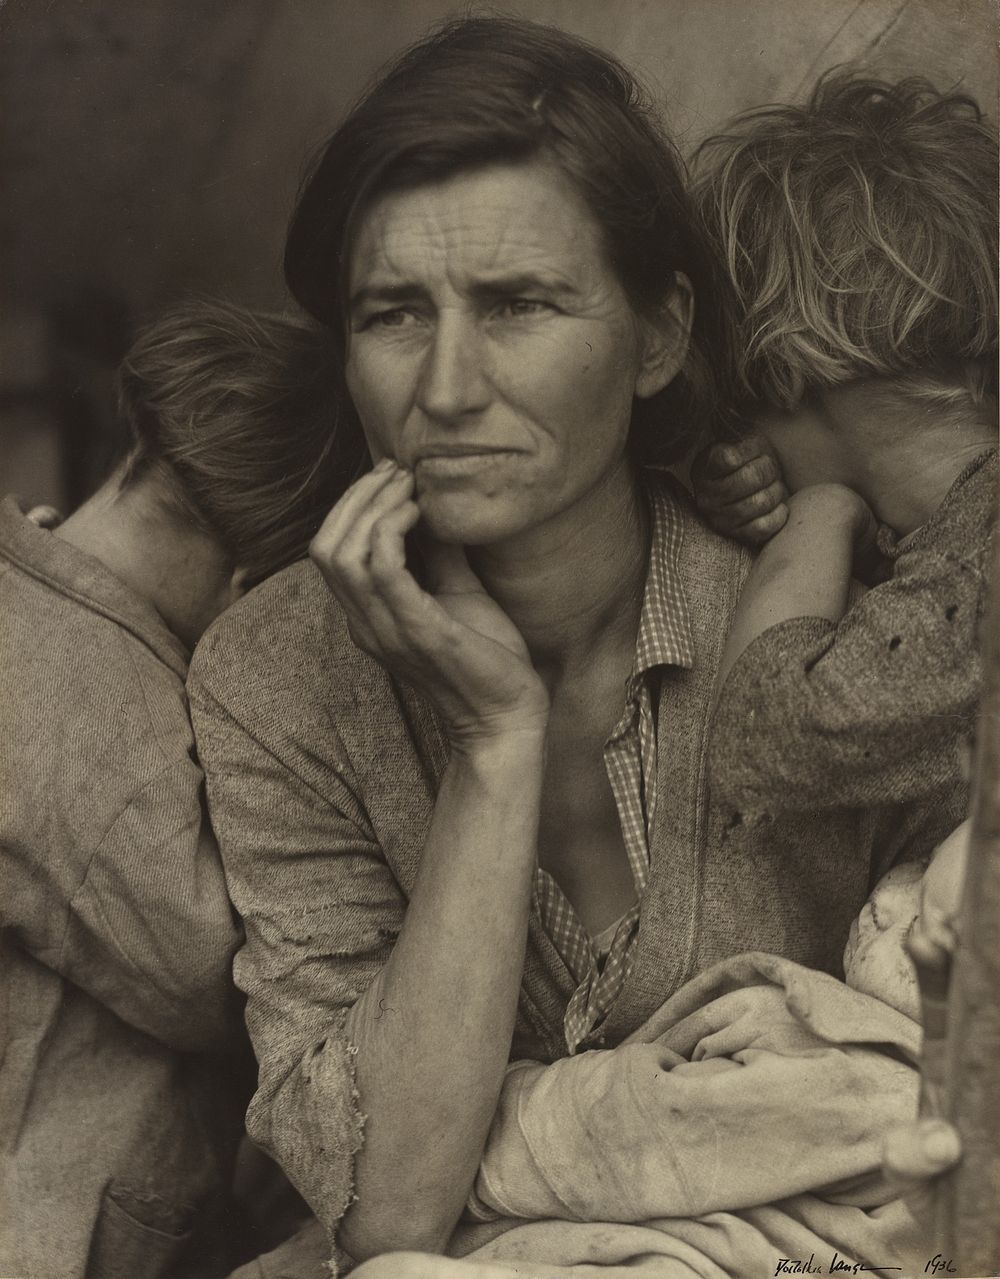 Human Erosion in California (Migrant Mother) by Dorothea Lange